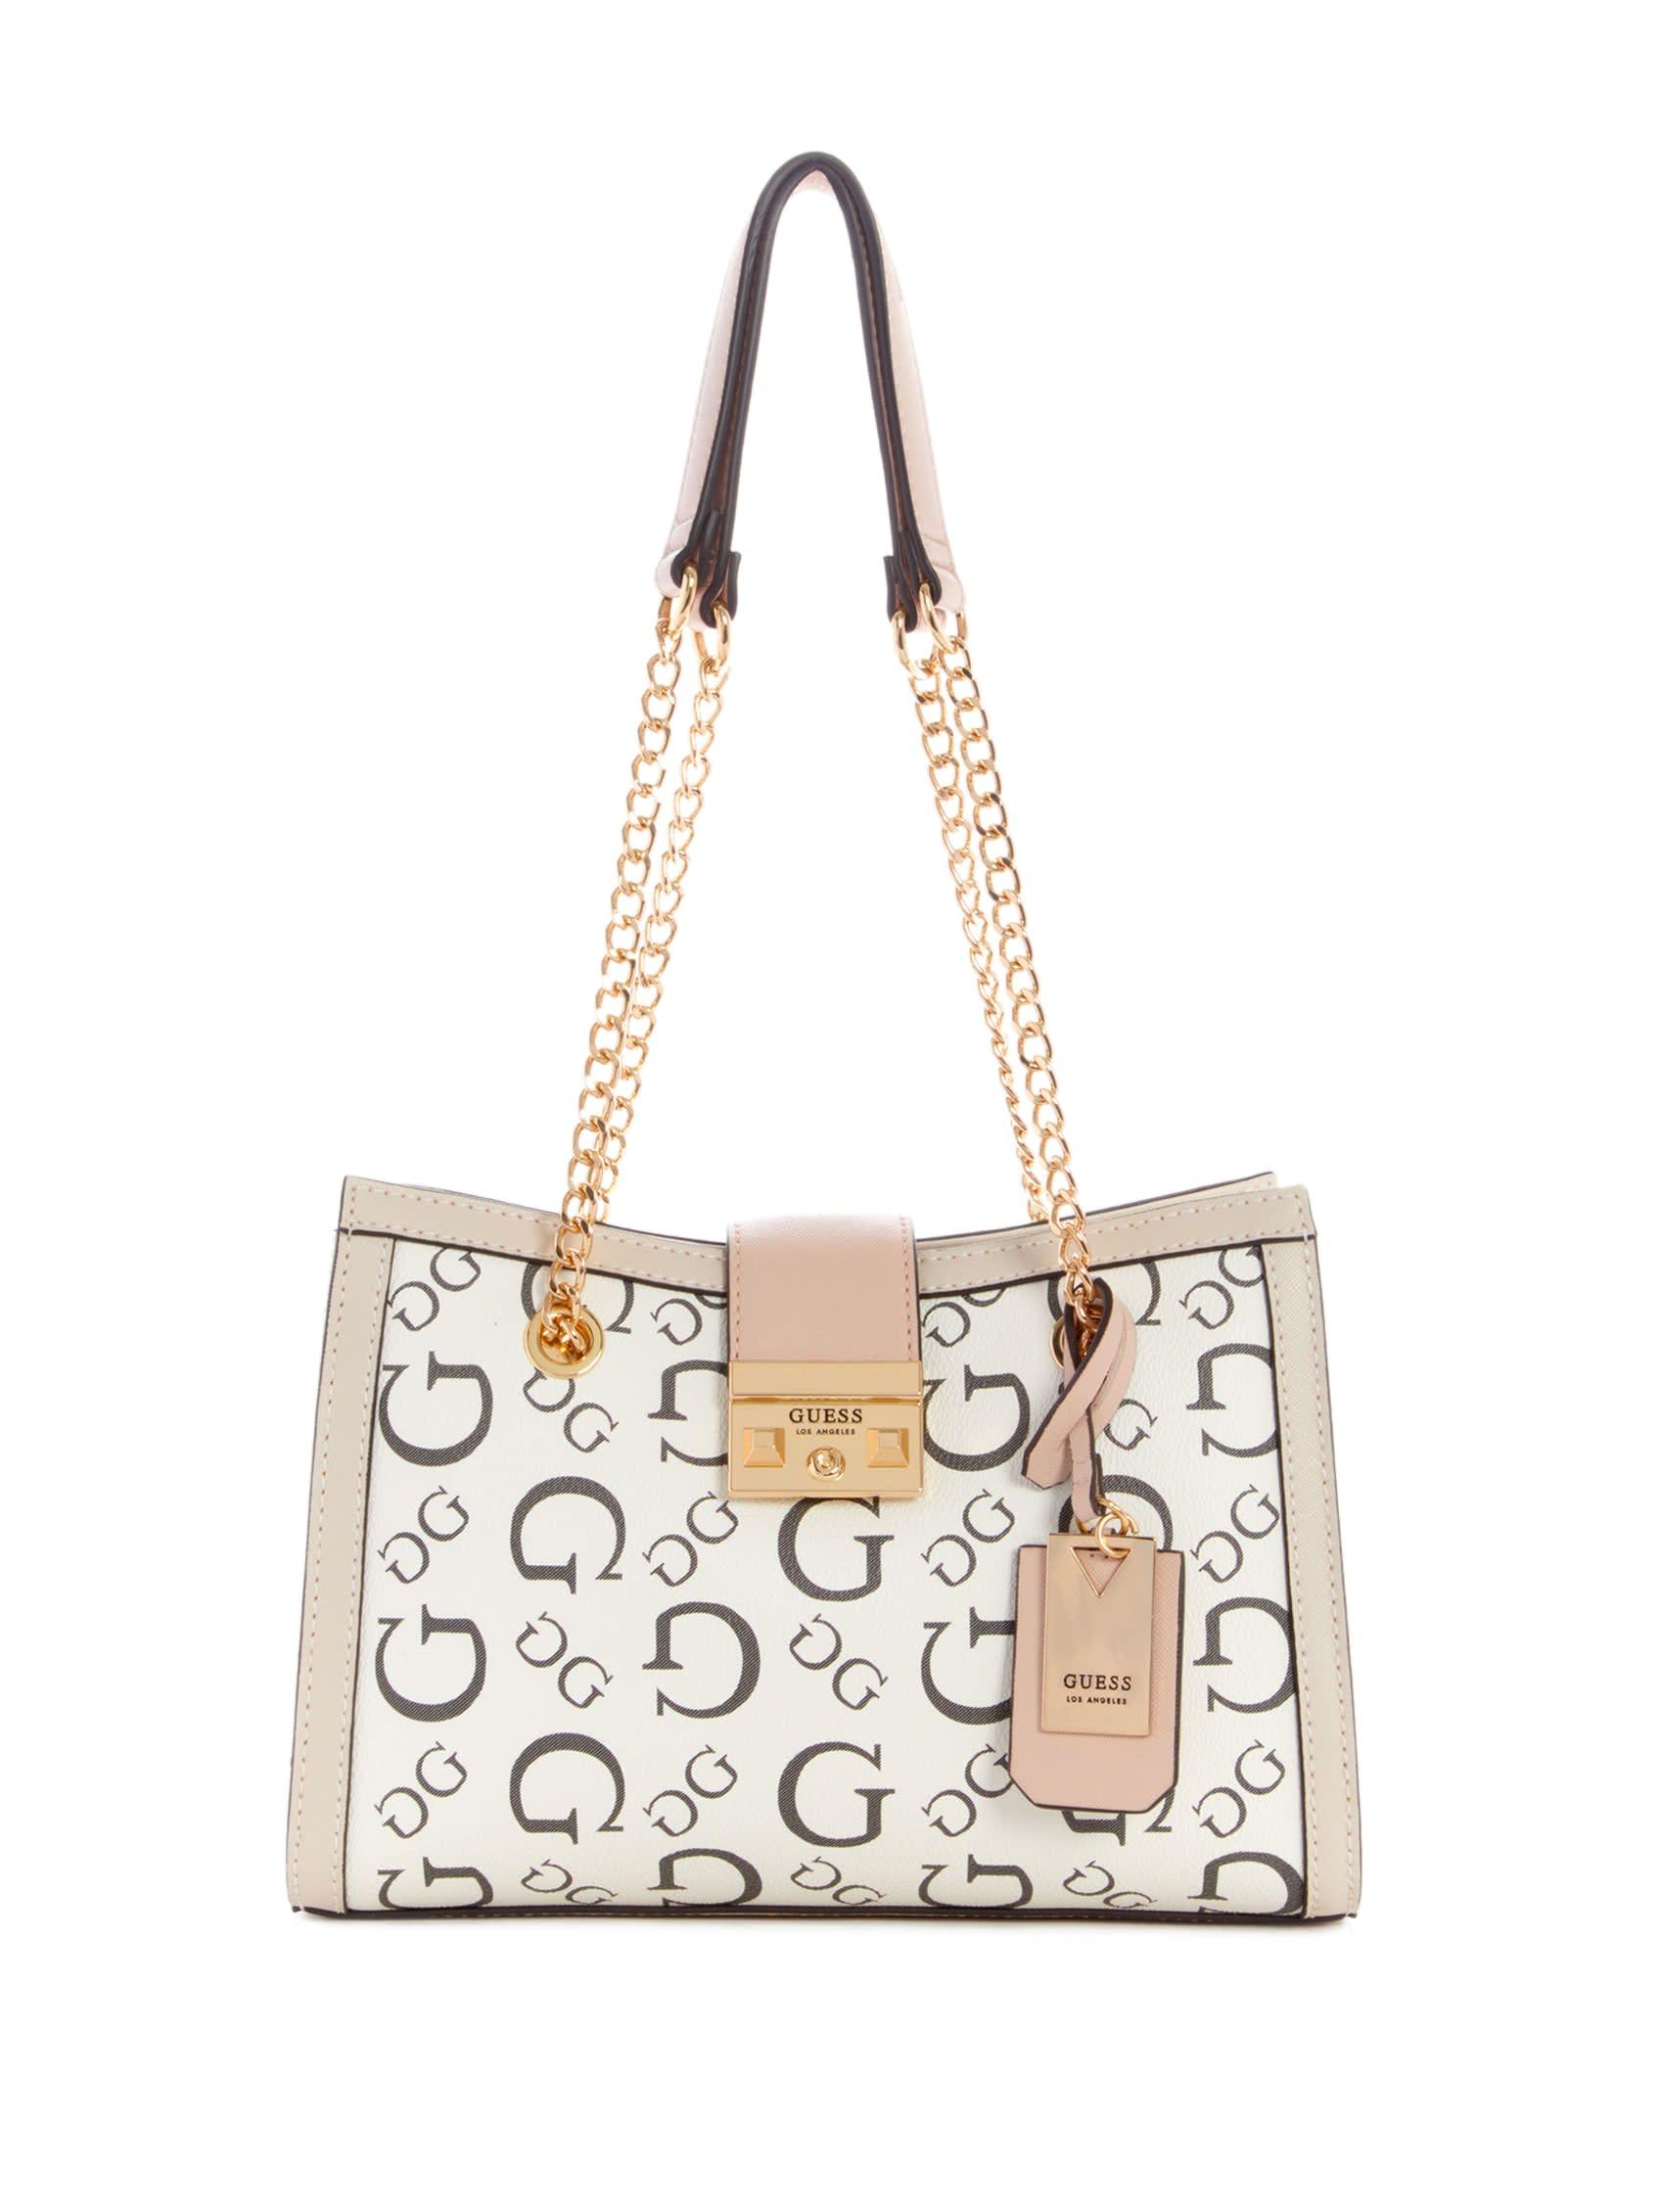 Guess Factory Marlo Logo Satchel in White